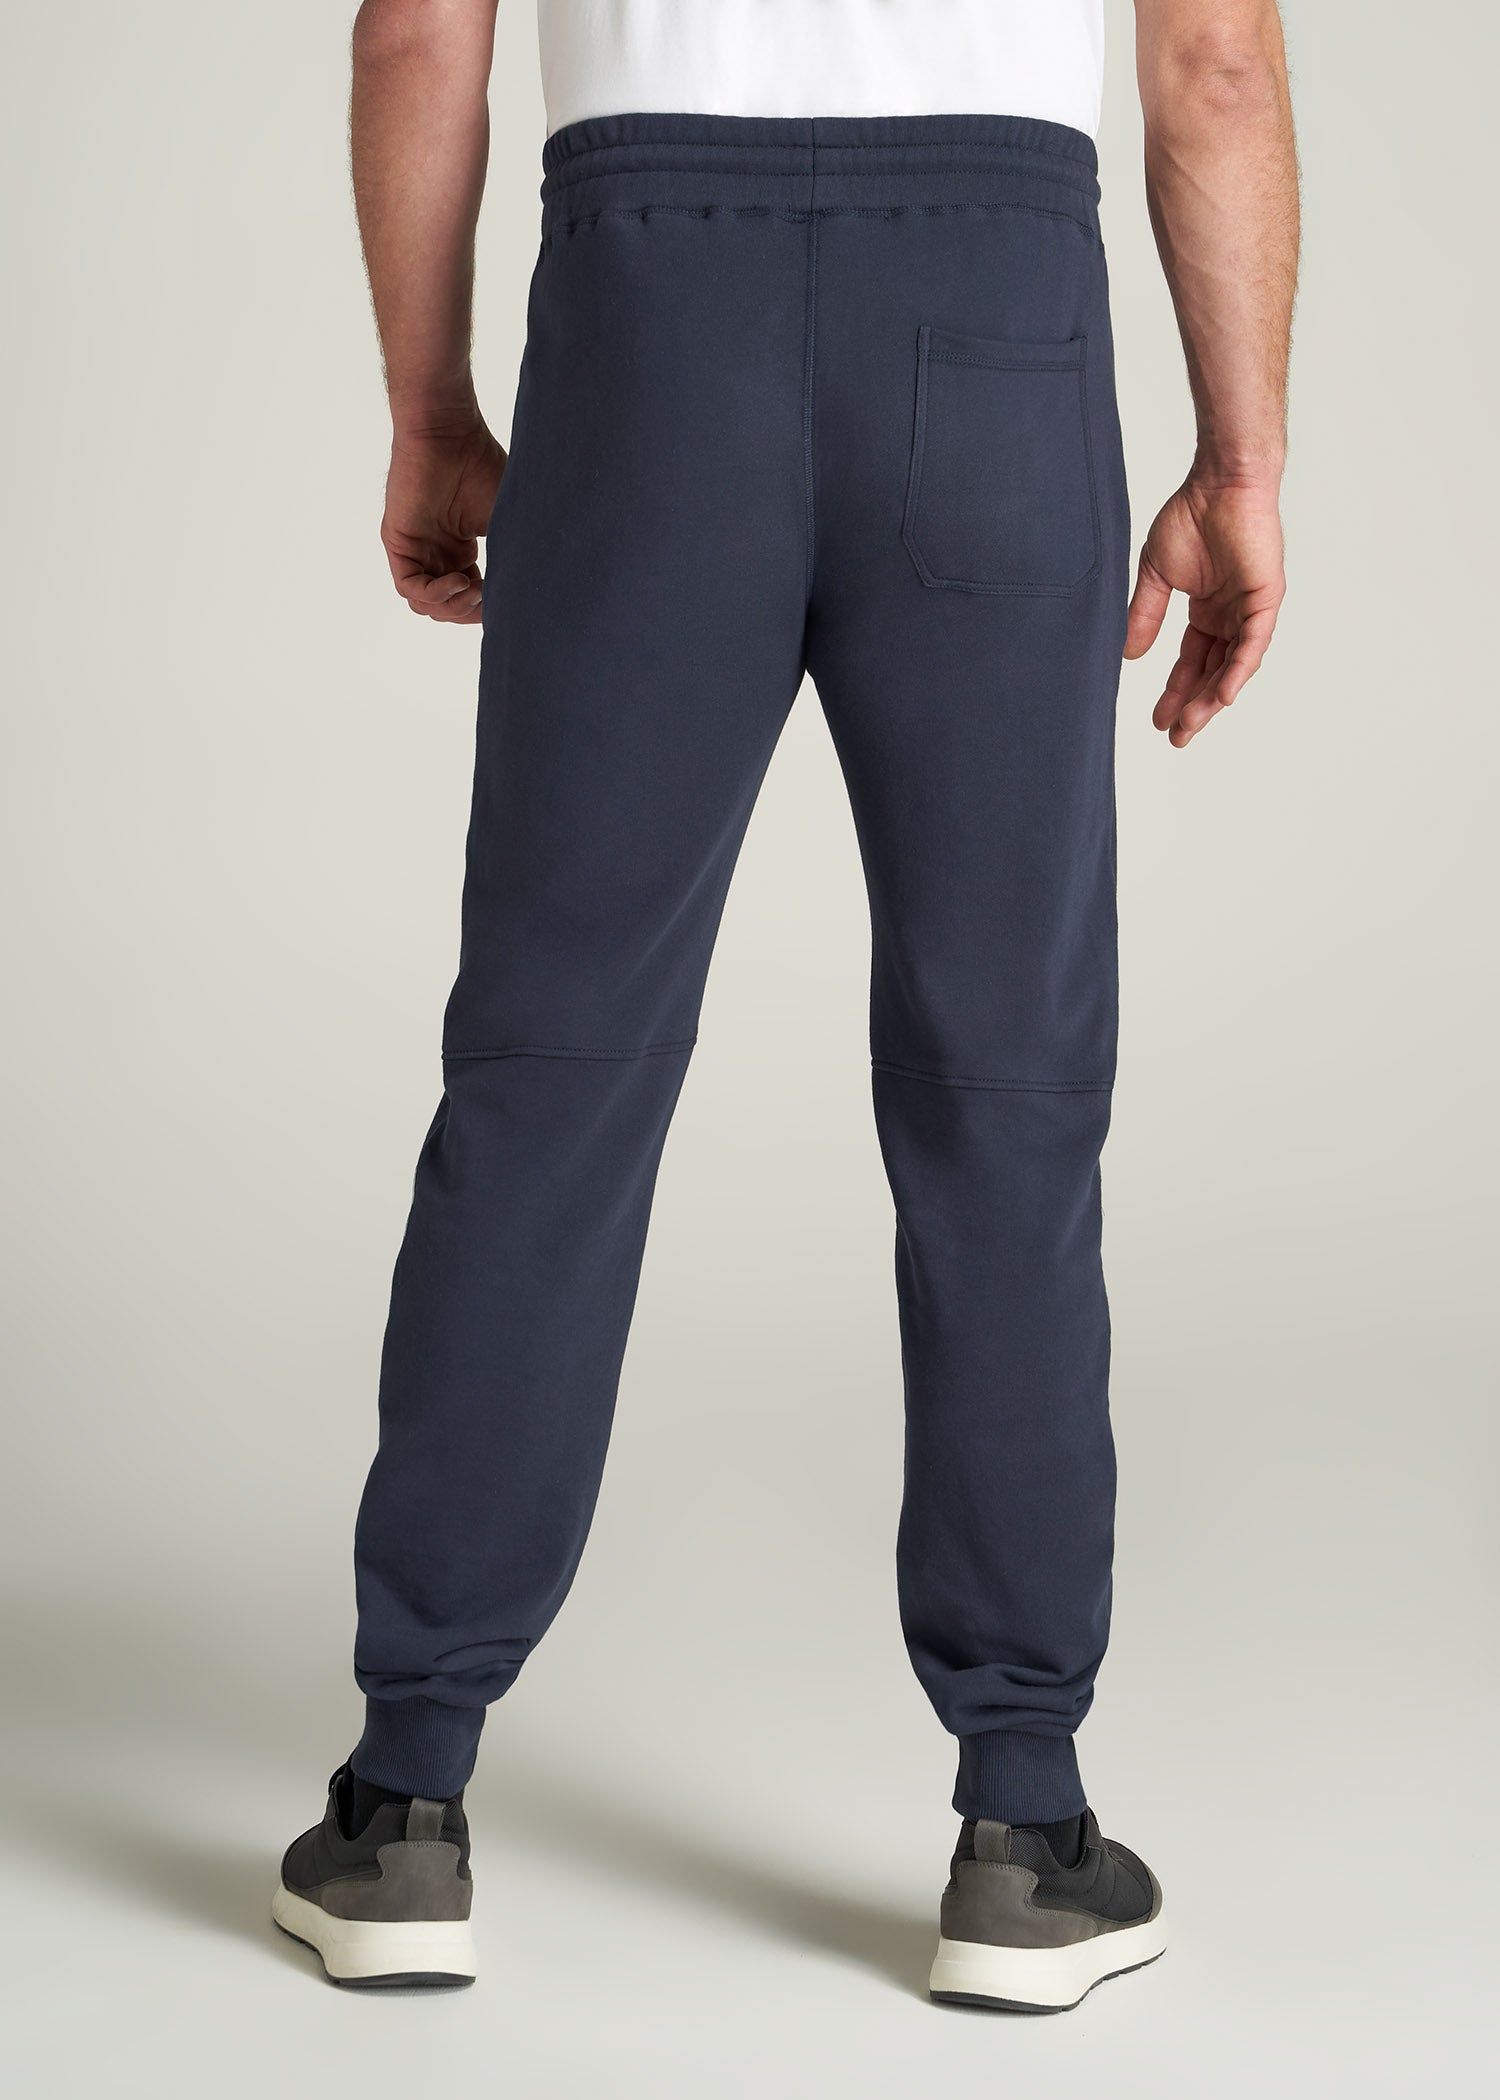 BAIT Men French Terry Jogger Pants - Made In LA (black)